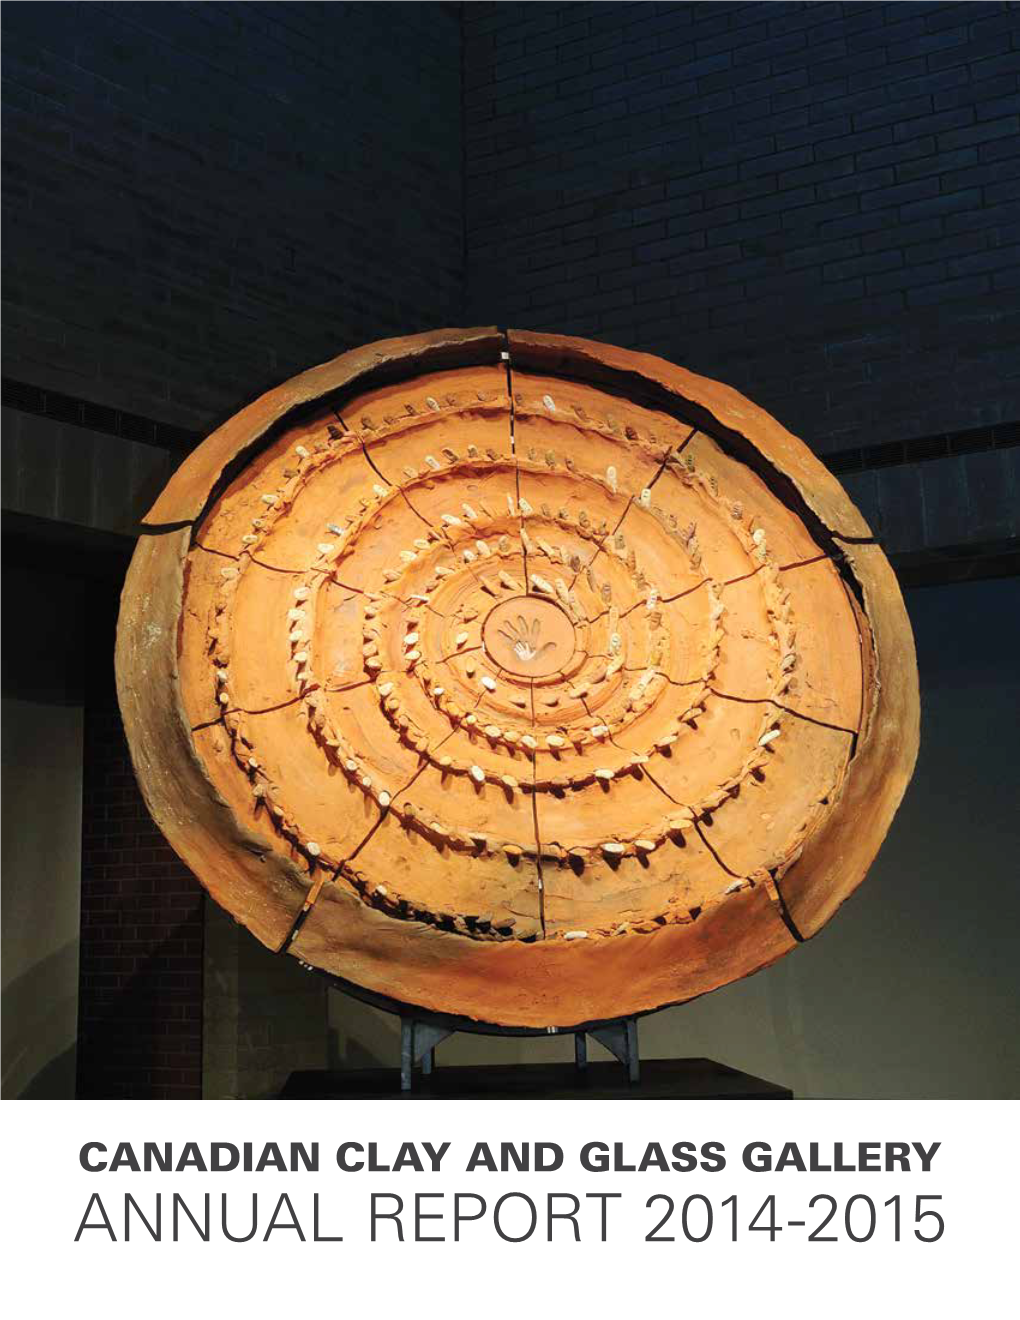 Canadian Clay and Glass Gallery Annual Report